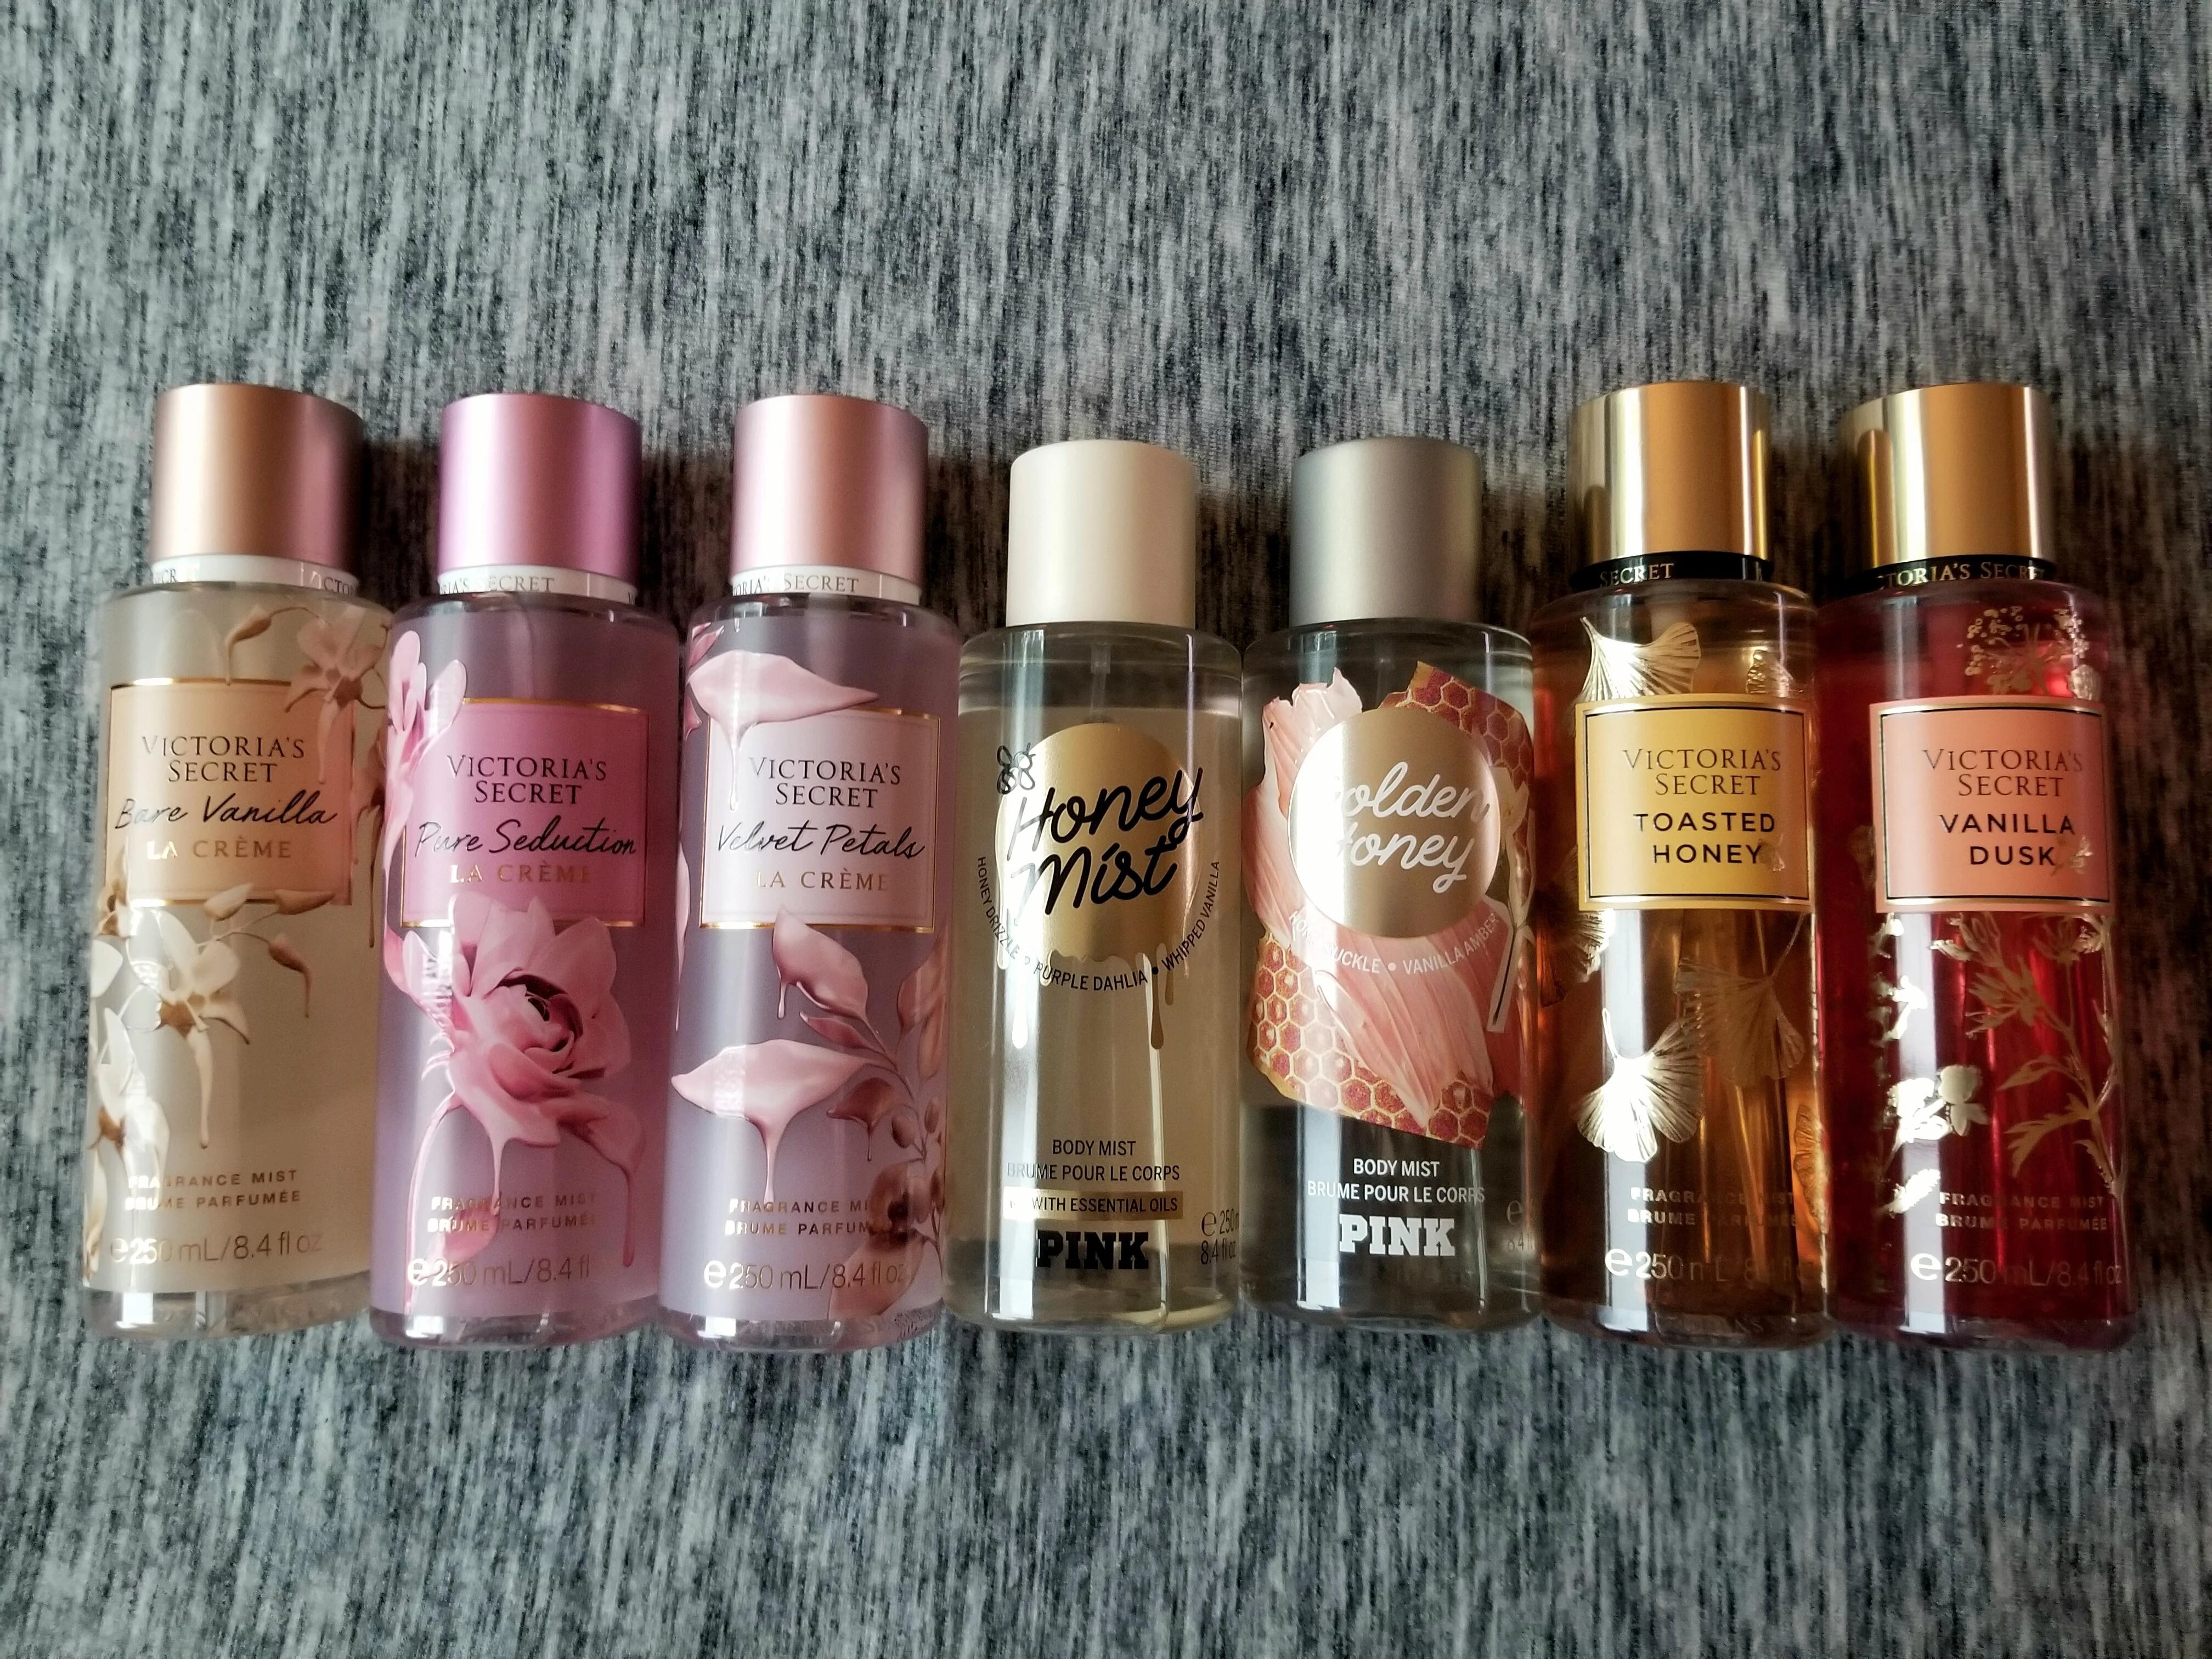 From Love Spell To Bombshell: Exploring Victoria's Secret Mist Scents